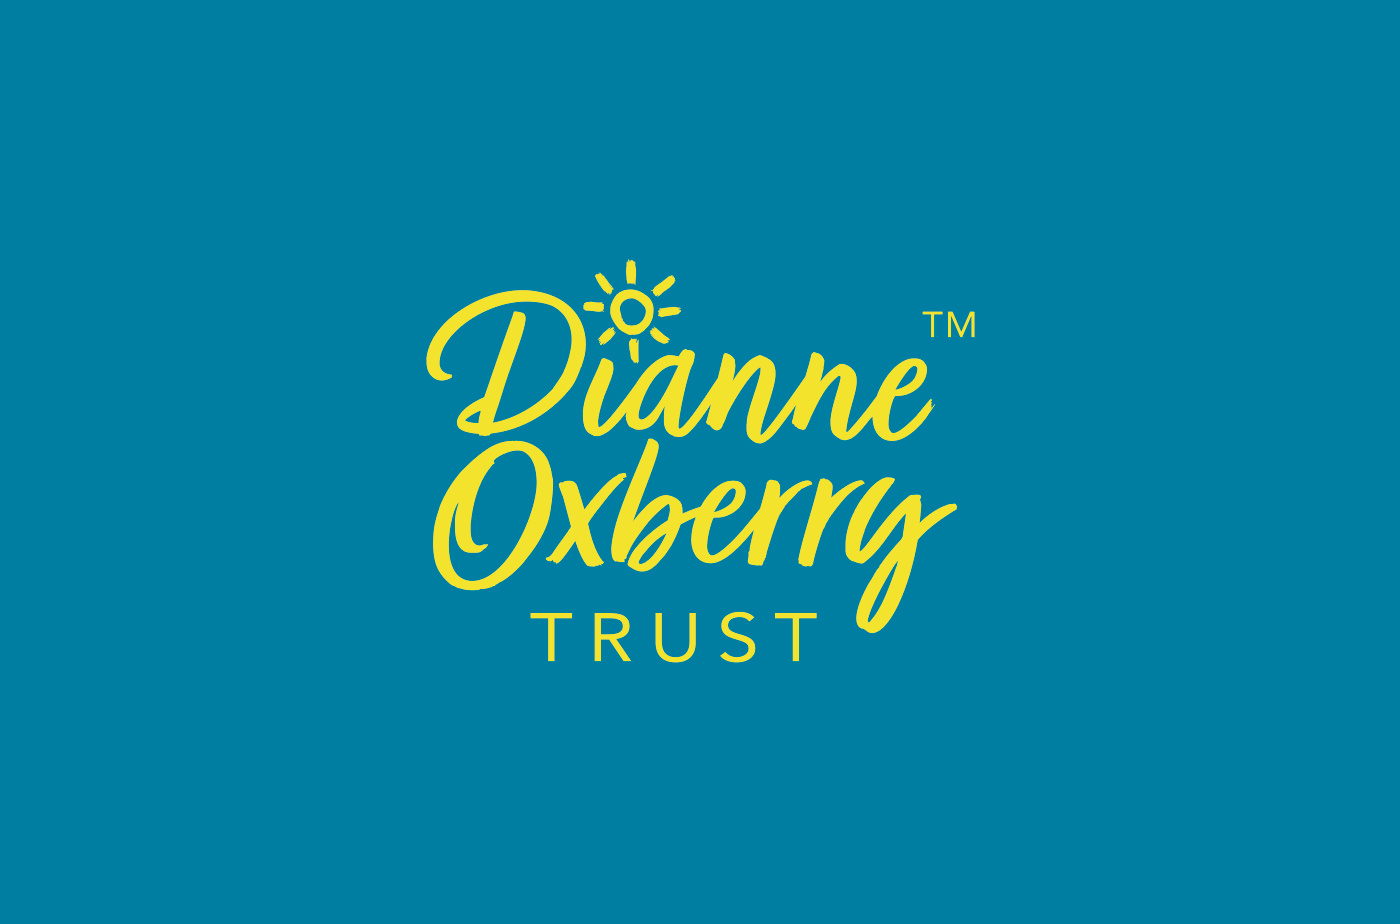 The Dianne Oxberry Trust logo